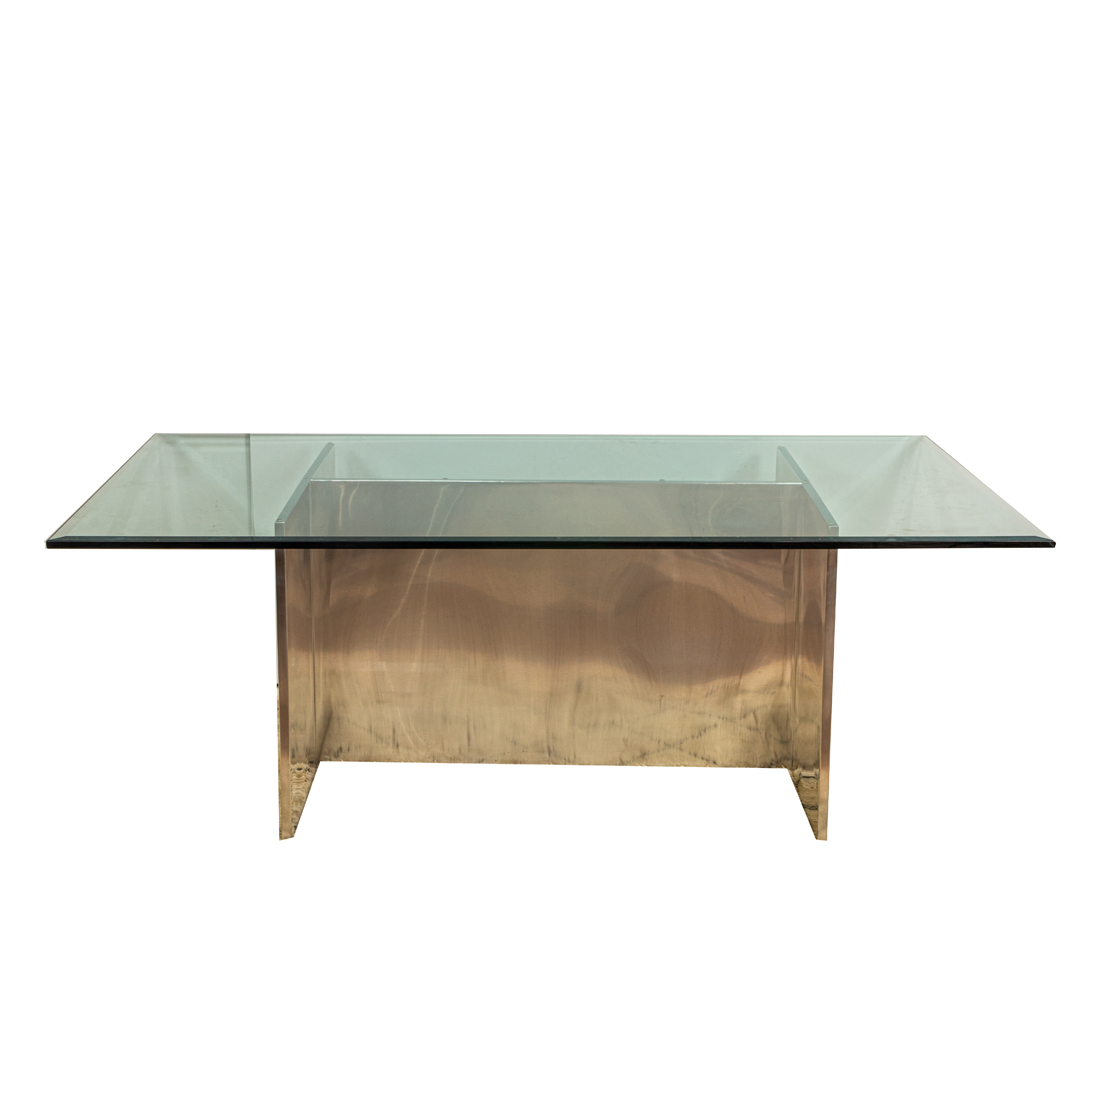 CONTEMPORARY DINING TABLE MANNER 3a17eb